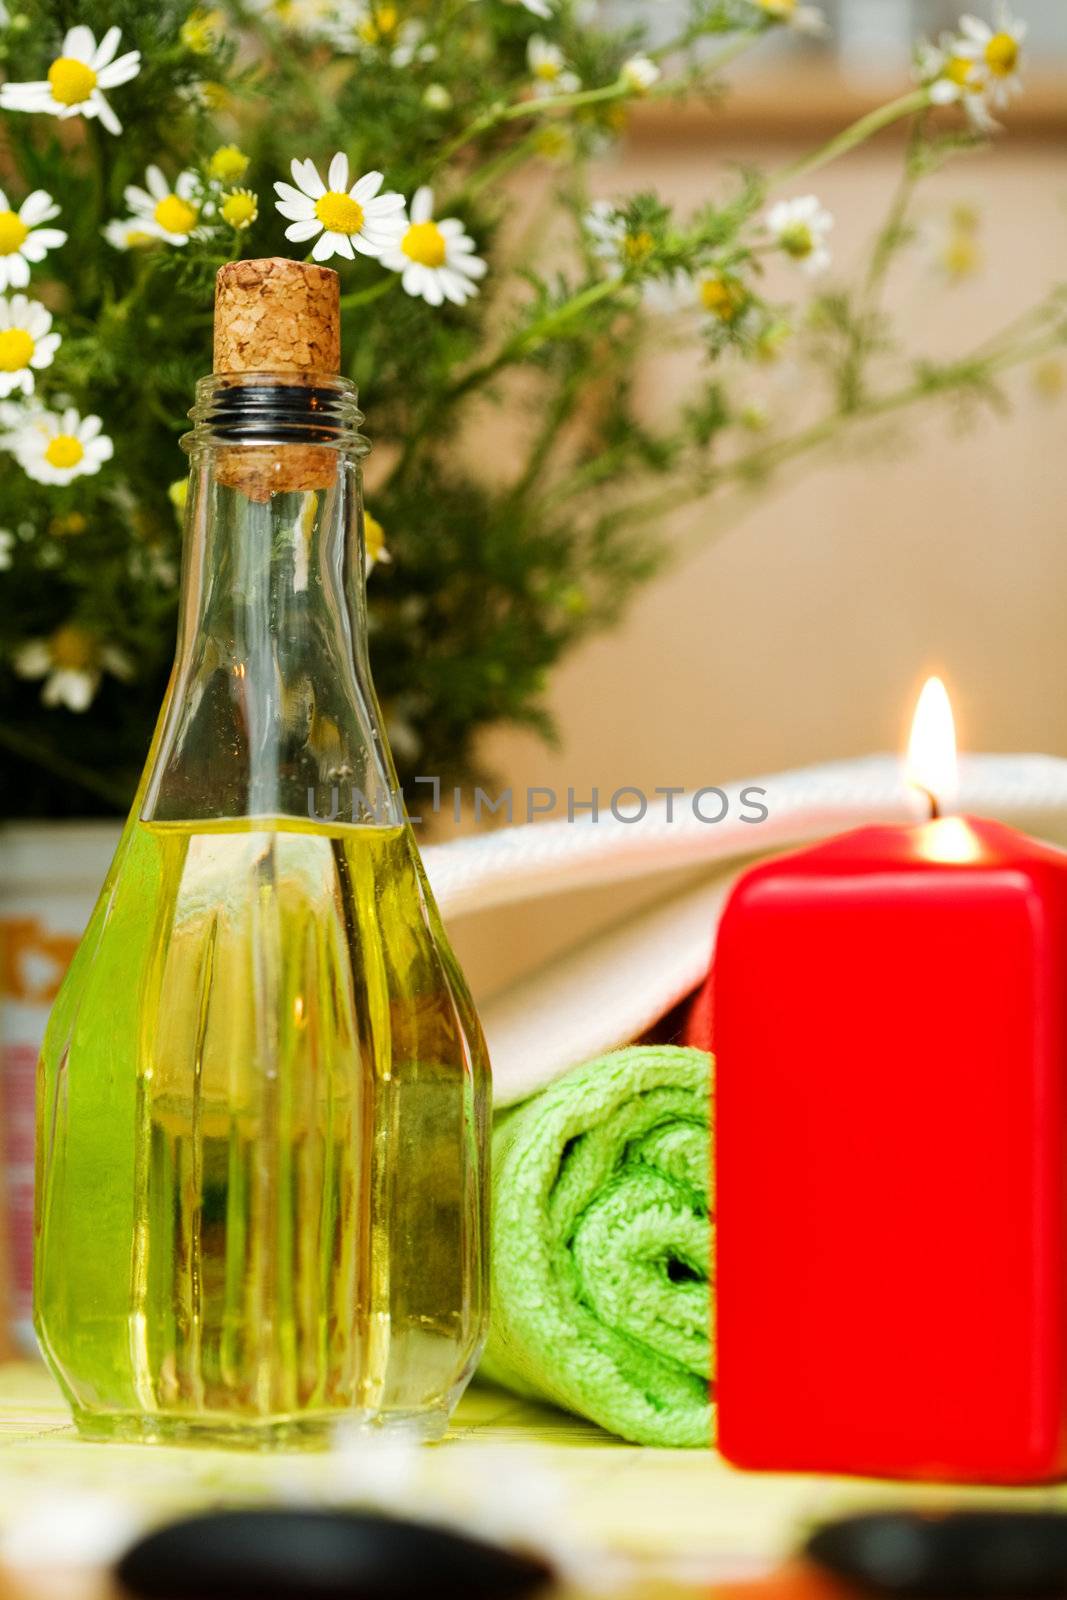 An image of a bottle of oil and a candle